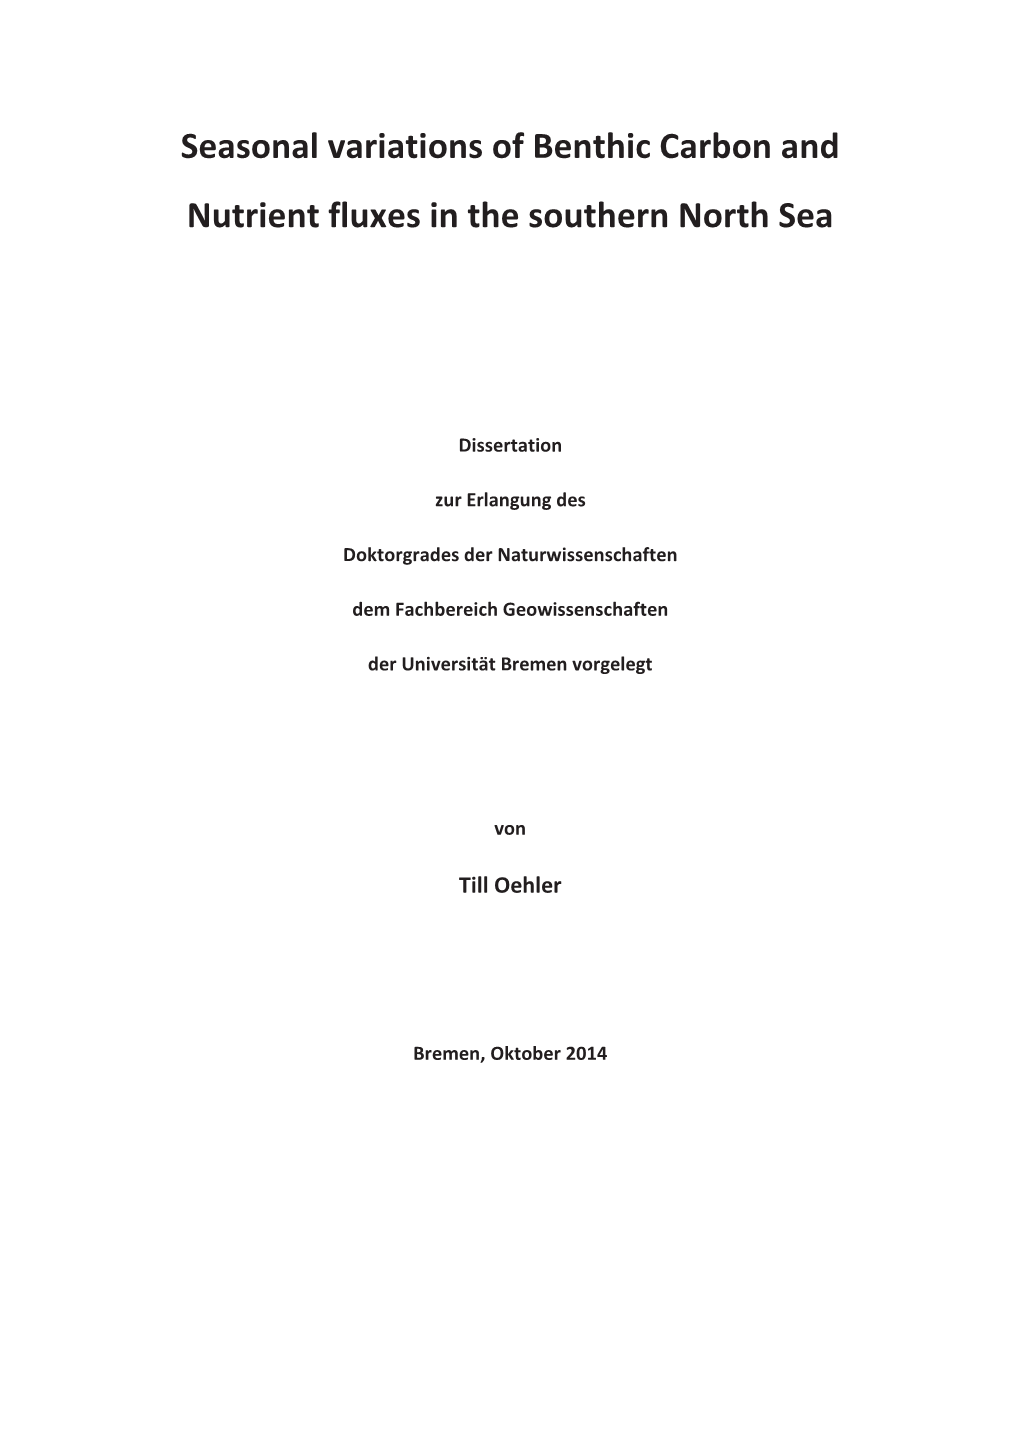 Seasonal Variations of Benthic Carbon and Nutrient Fluxes in the Southern North Sea